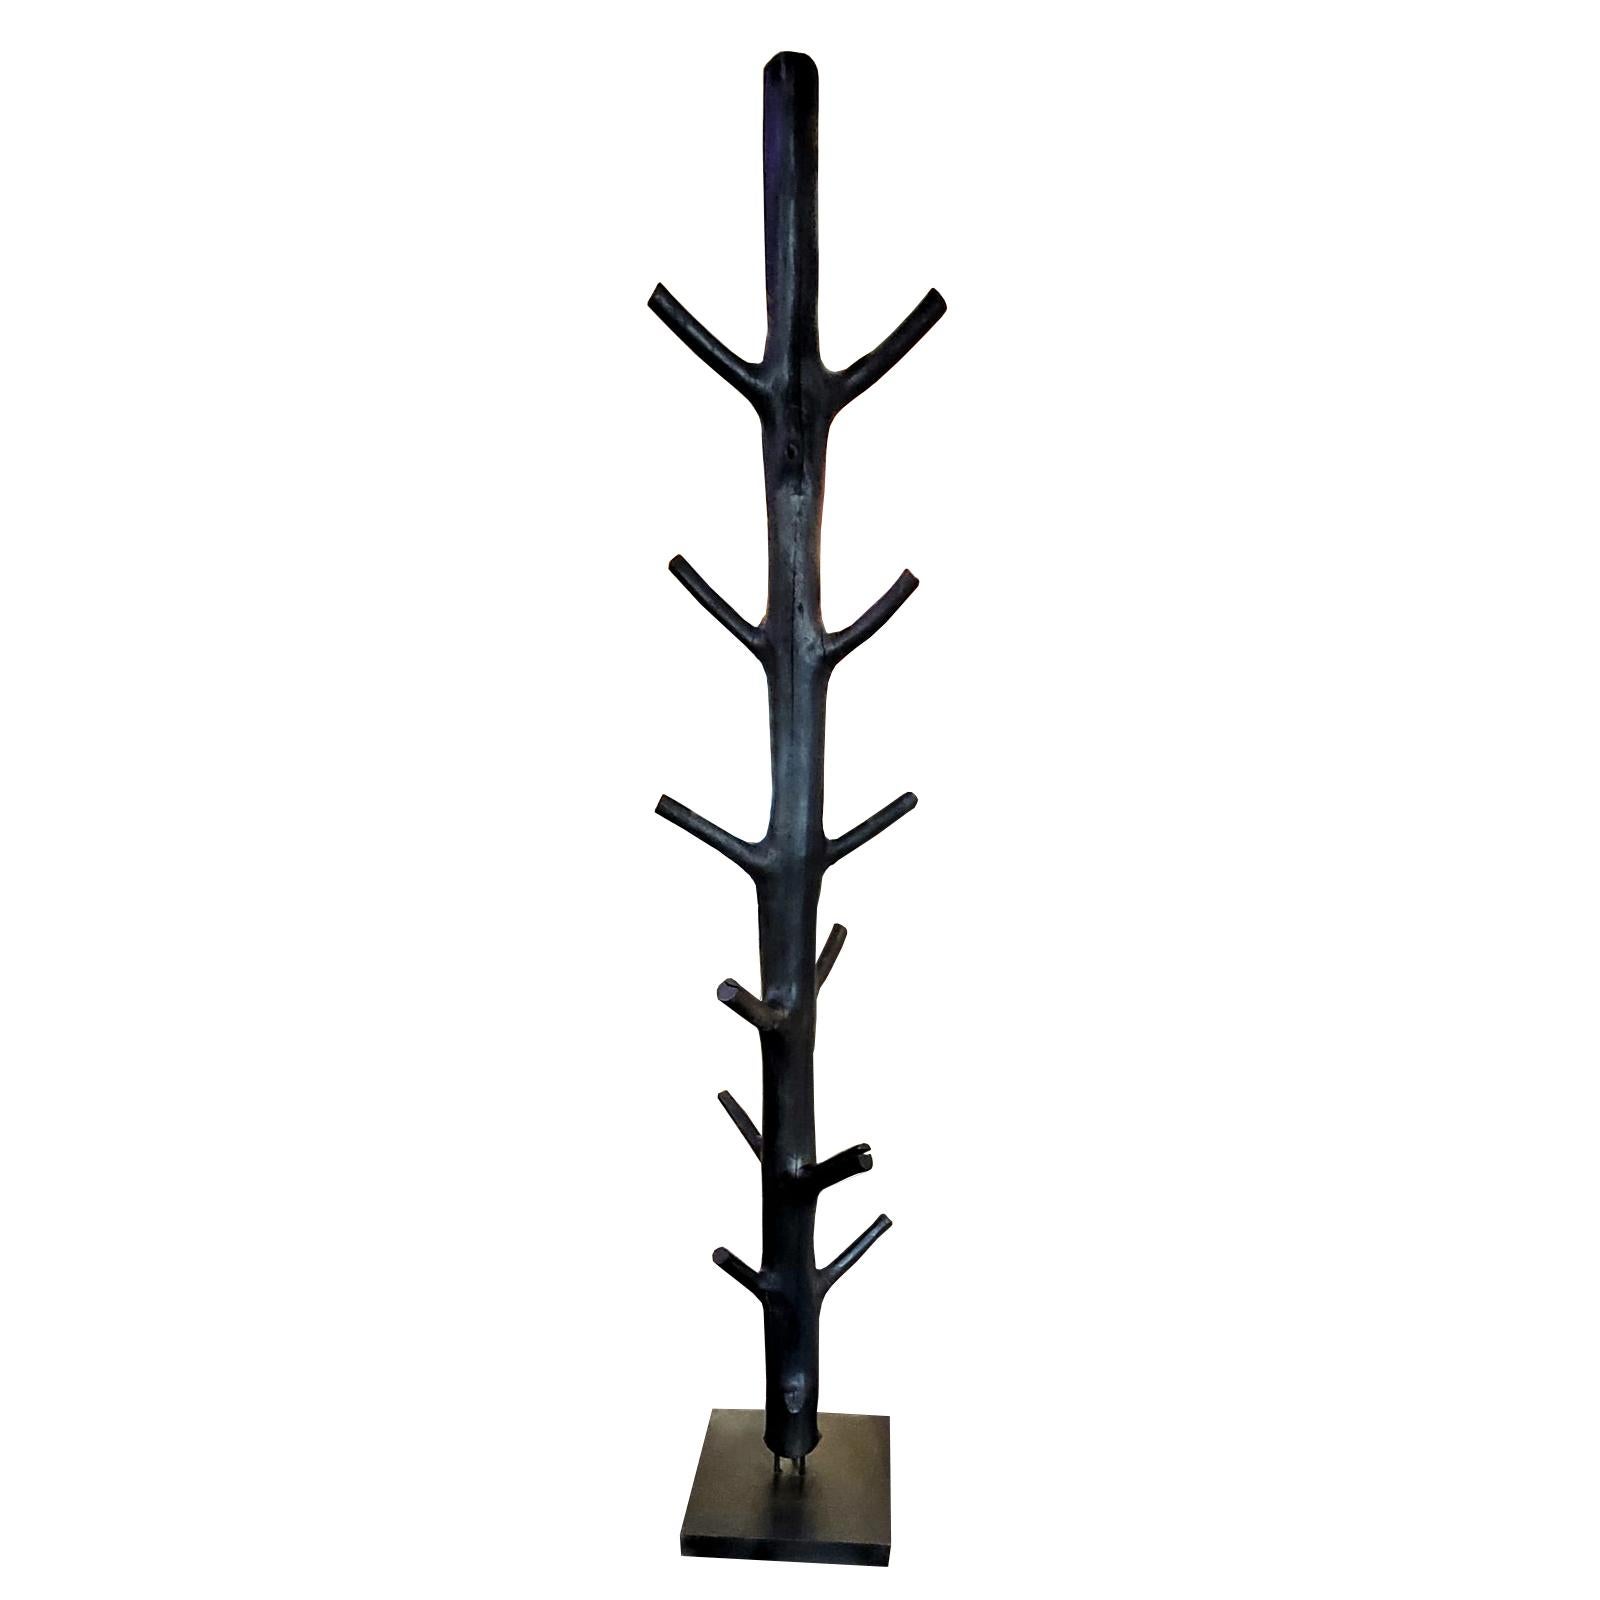 Coatrack blackened wooden tree
made with polished natural wood
tree with black painting.
On black iron base.